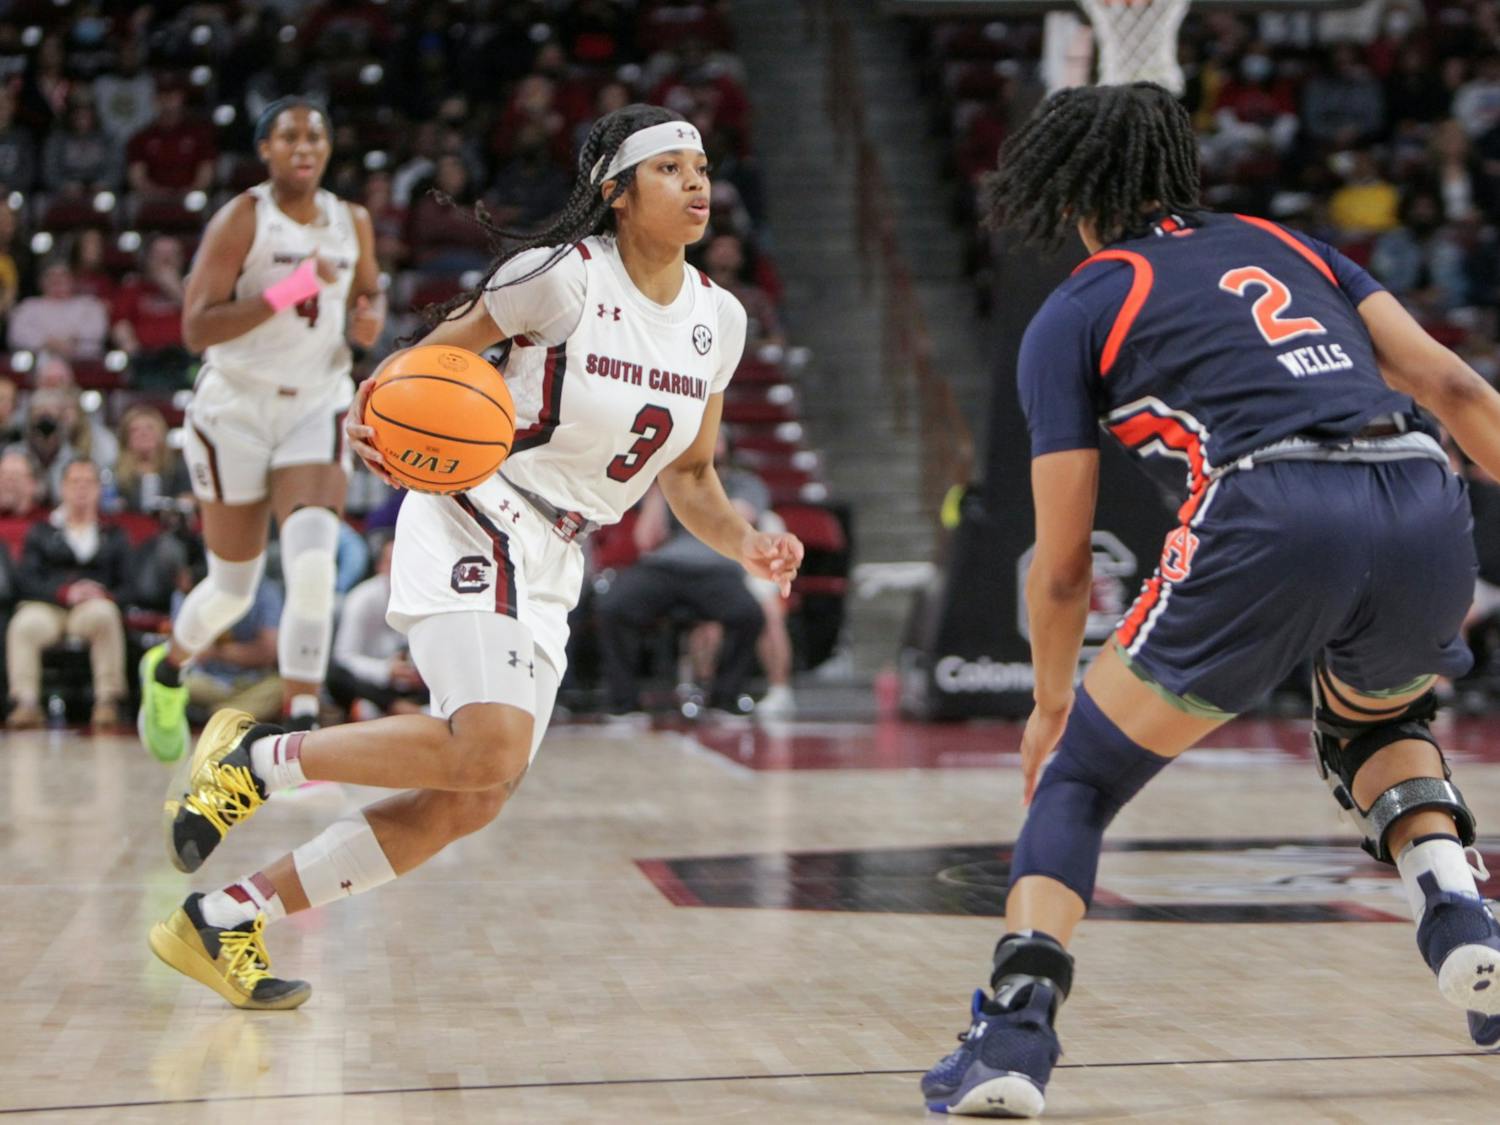 Senior guard Destanni Henderson works her way around a defender during during a game on Feb. 17, 2022 at Colonial Life Arena in Columbia, SC. The Gamecocks beat Auburn 75-38.